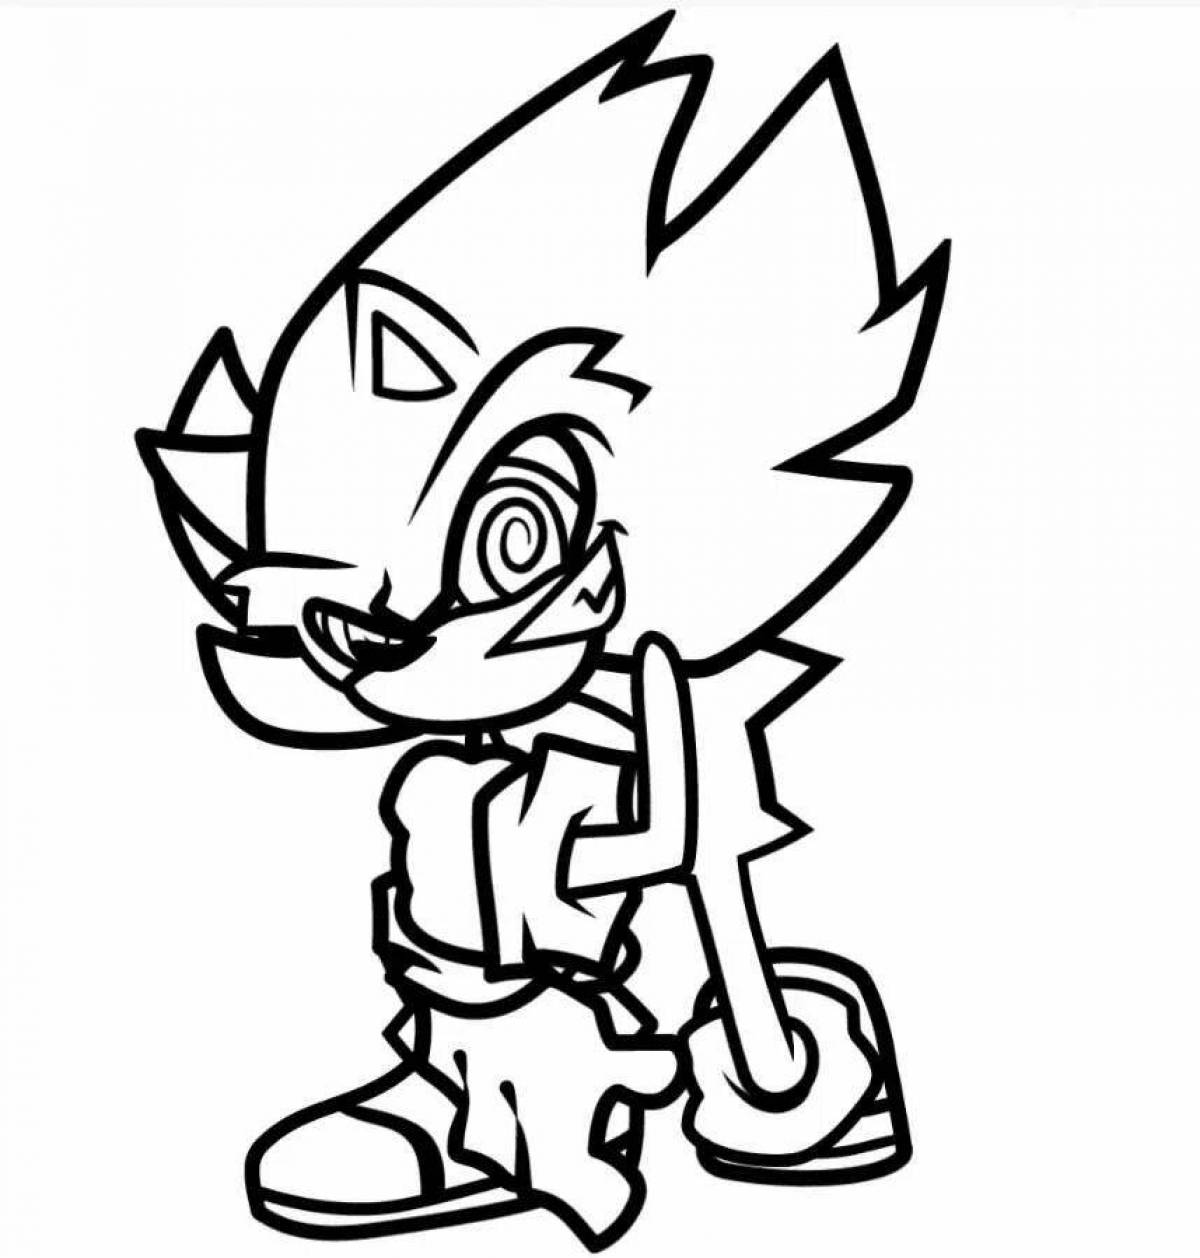 Outstanding sonic exe fnf coloring